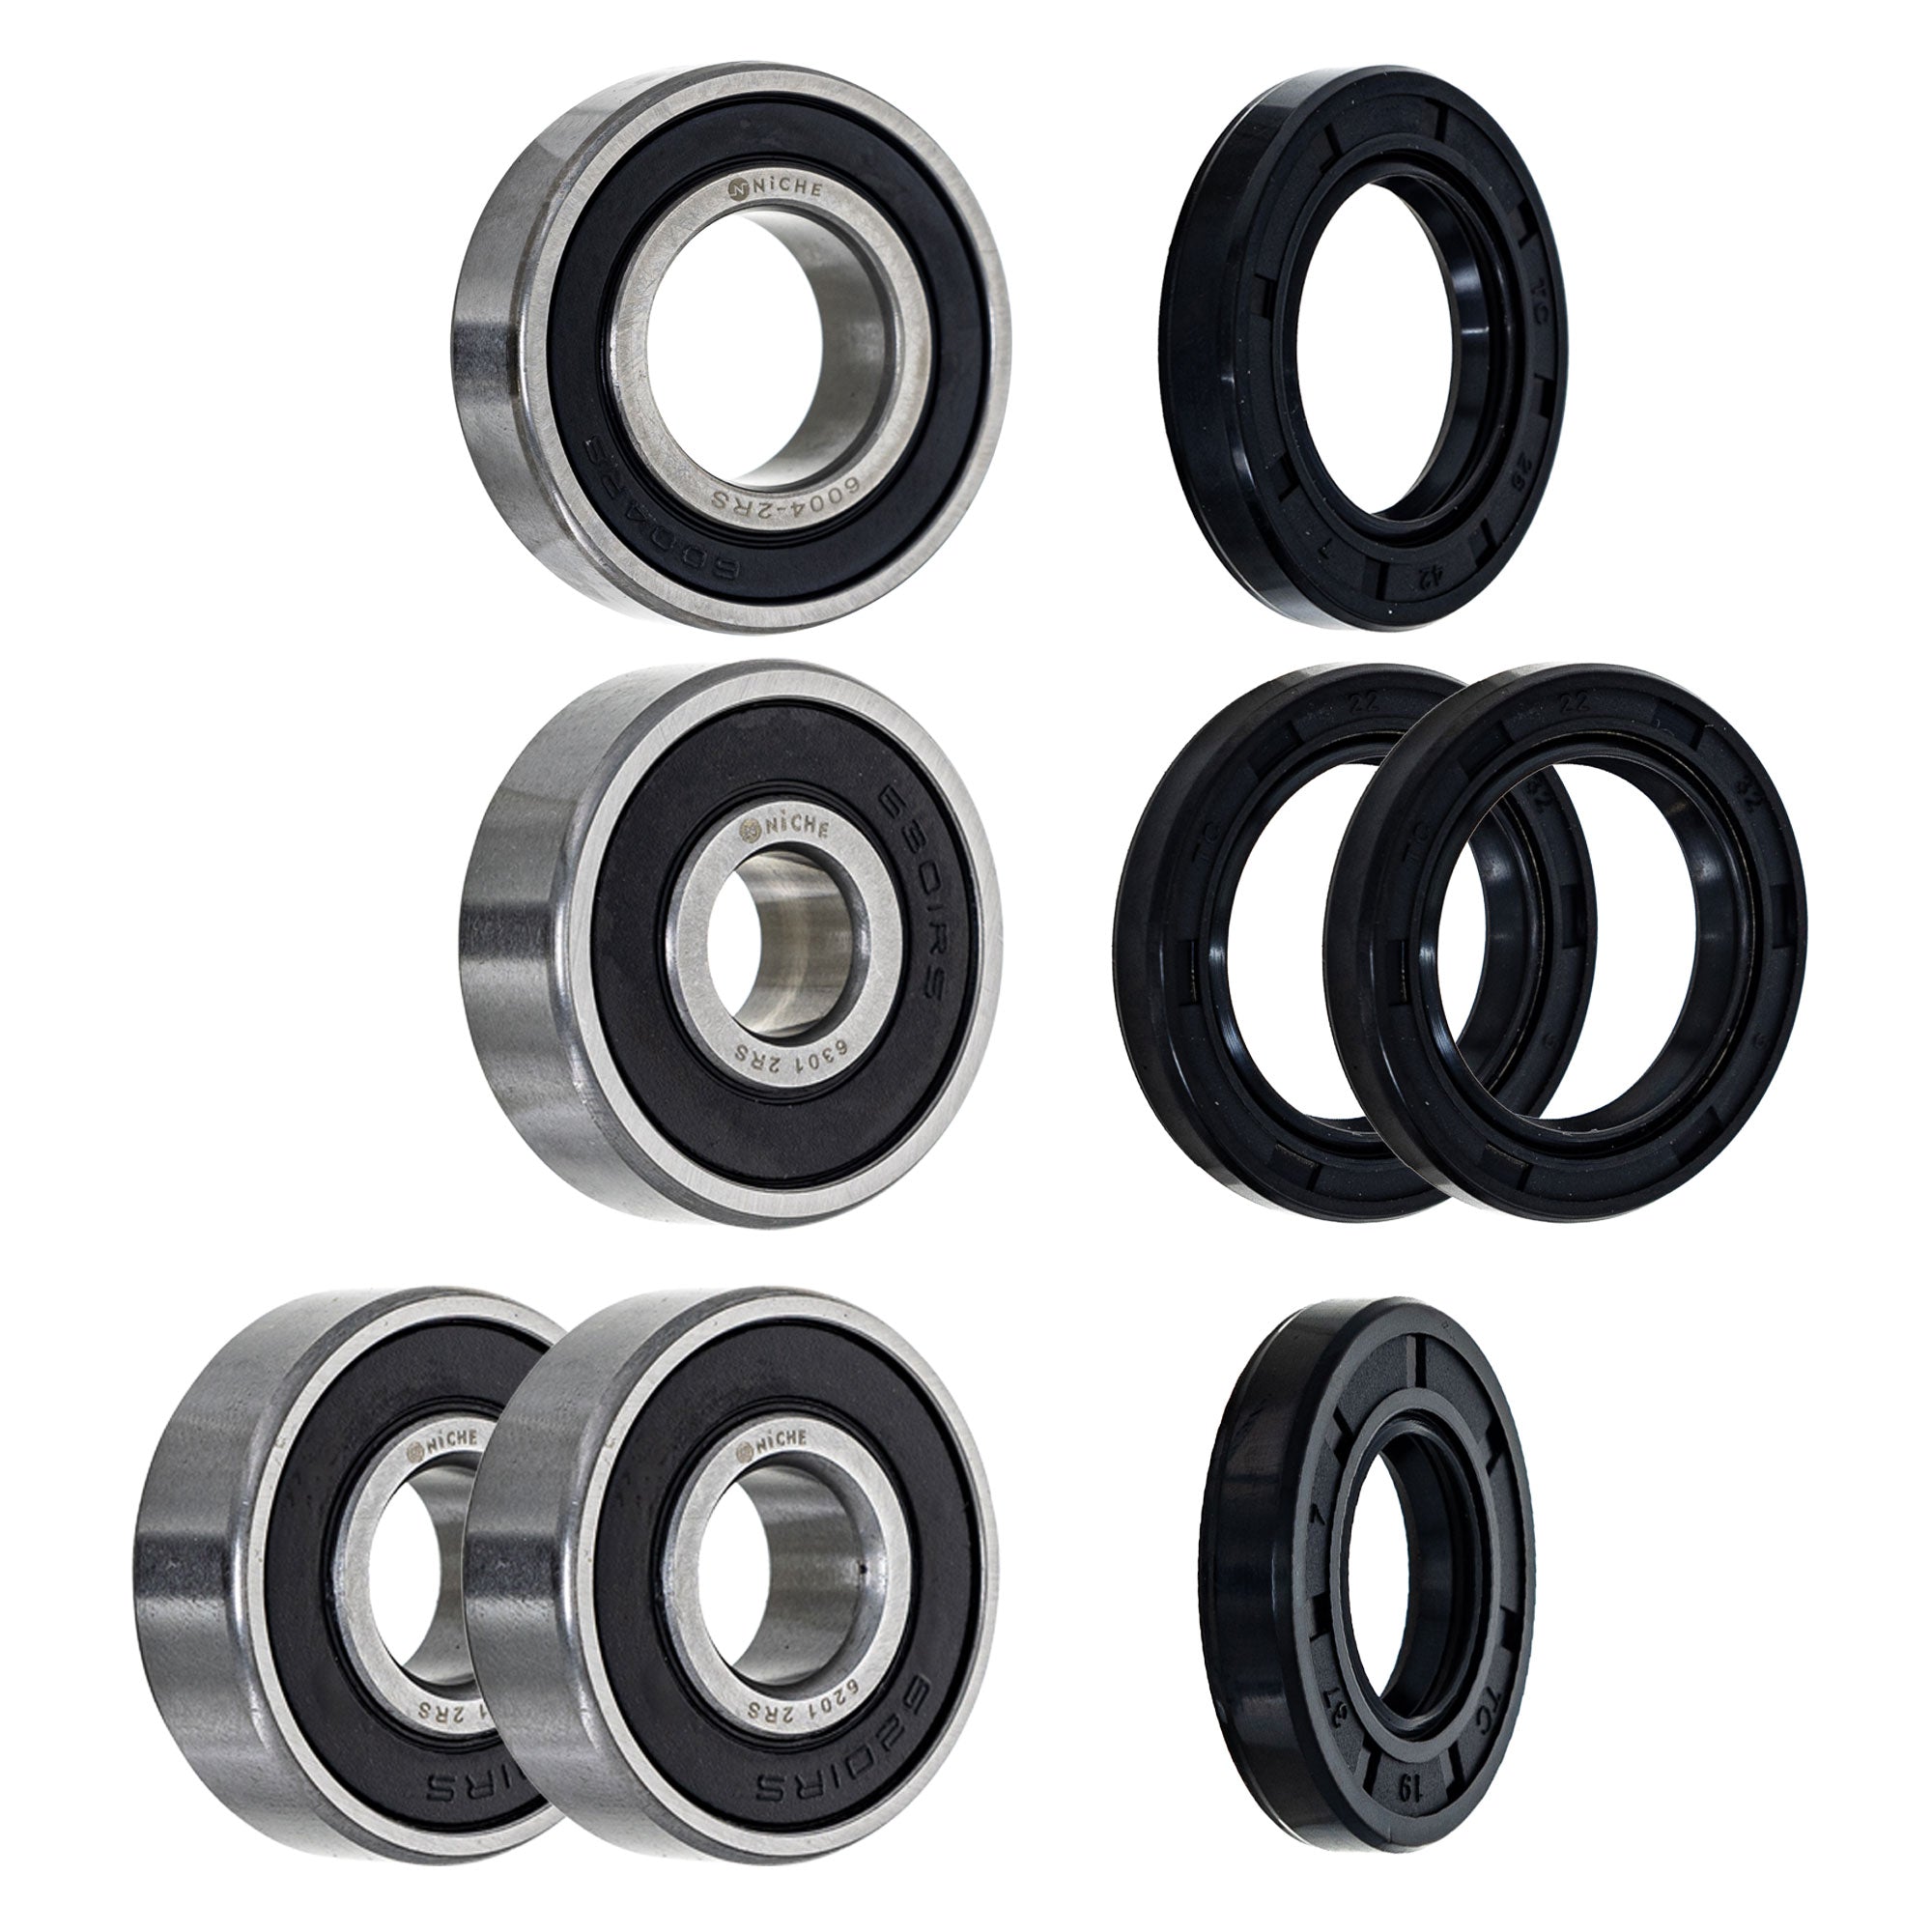 Wheel Bearing Seal Kit for zOTHER Ref No Z125 NICHE MK1008524